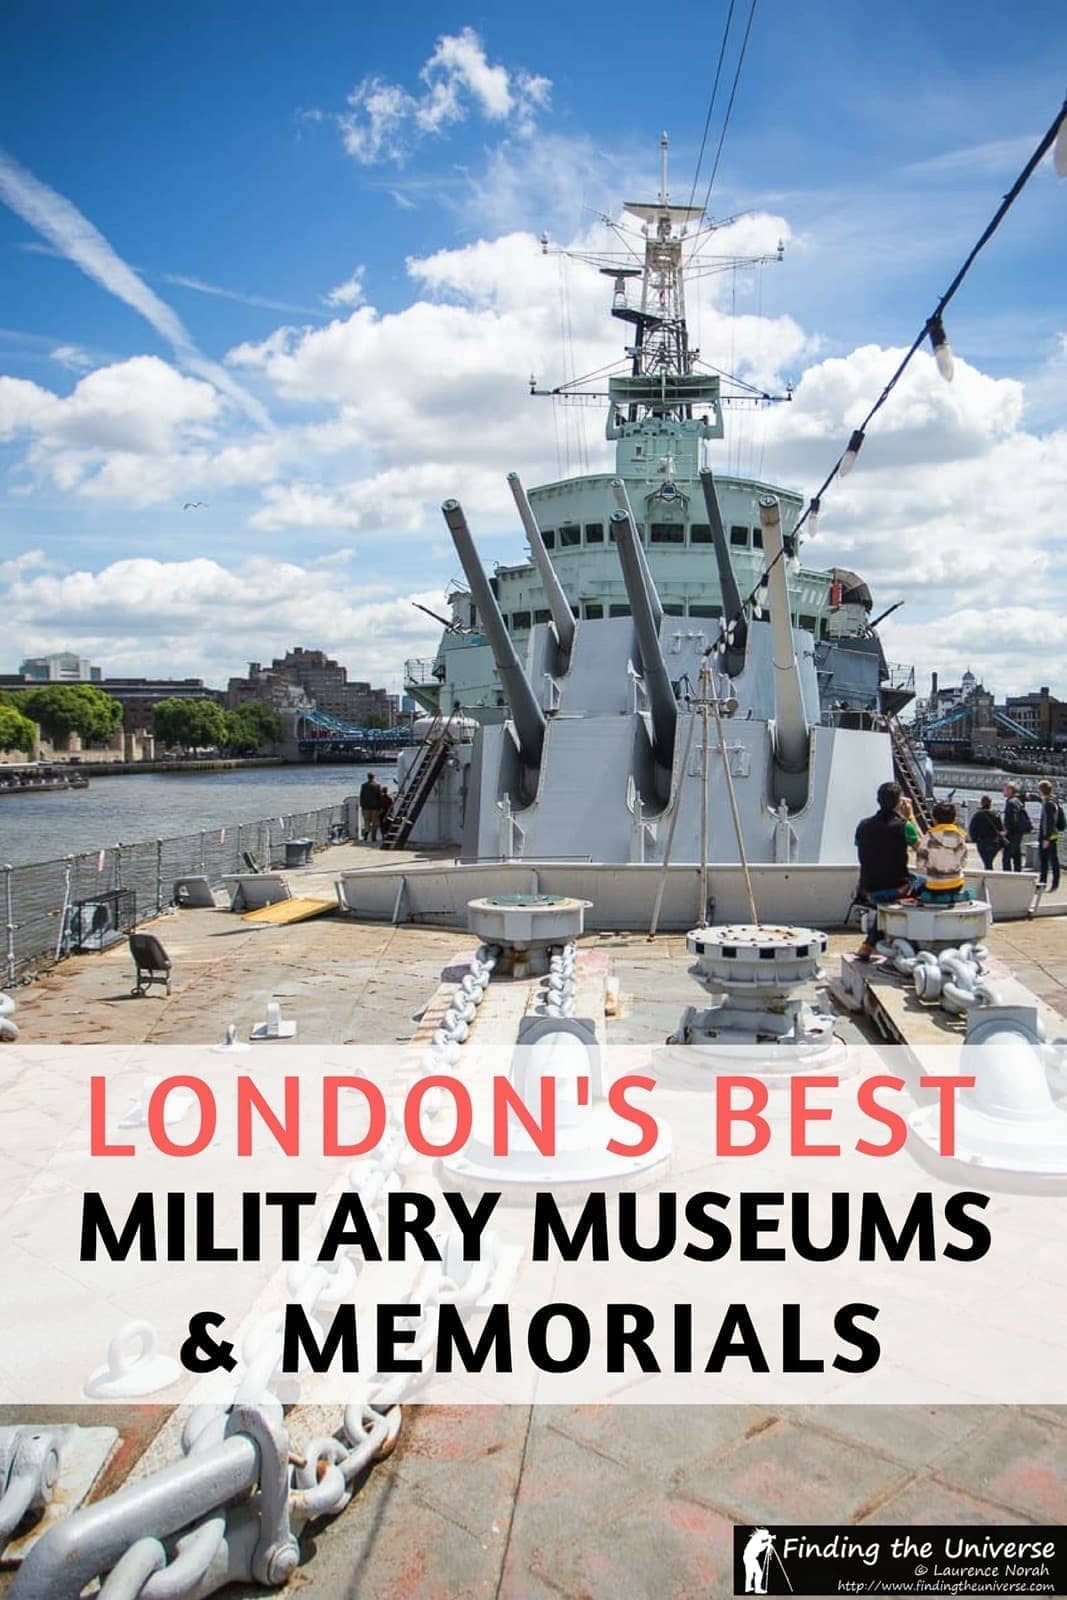 A guide to London's Military Museums and Memorials! The capital of the UK has some of the best military museums, covering a wide range of themes, and are a must when visiting the city!